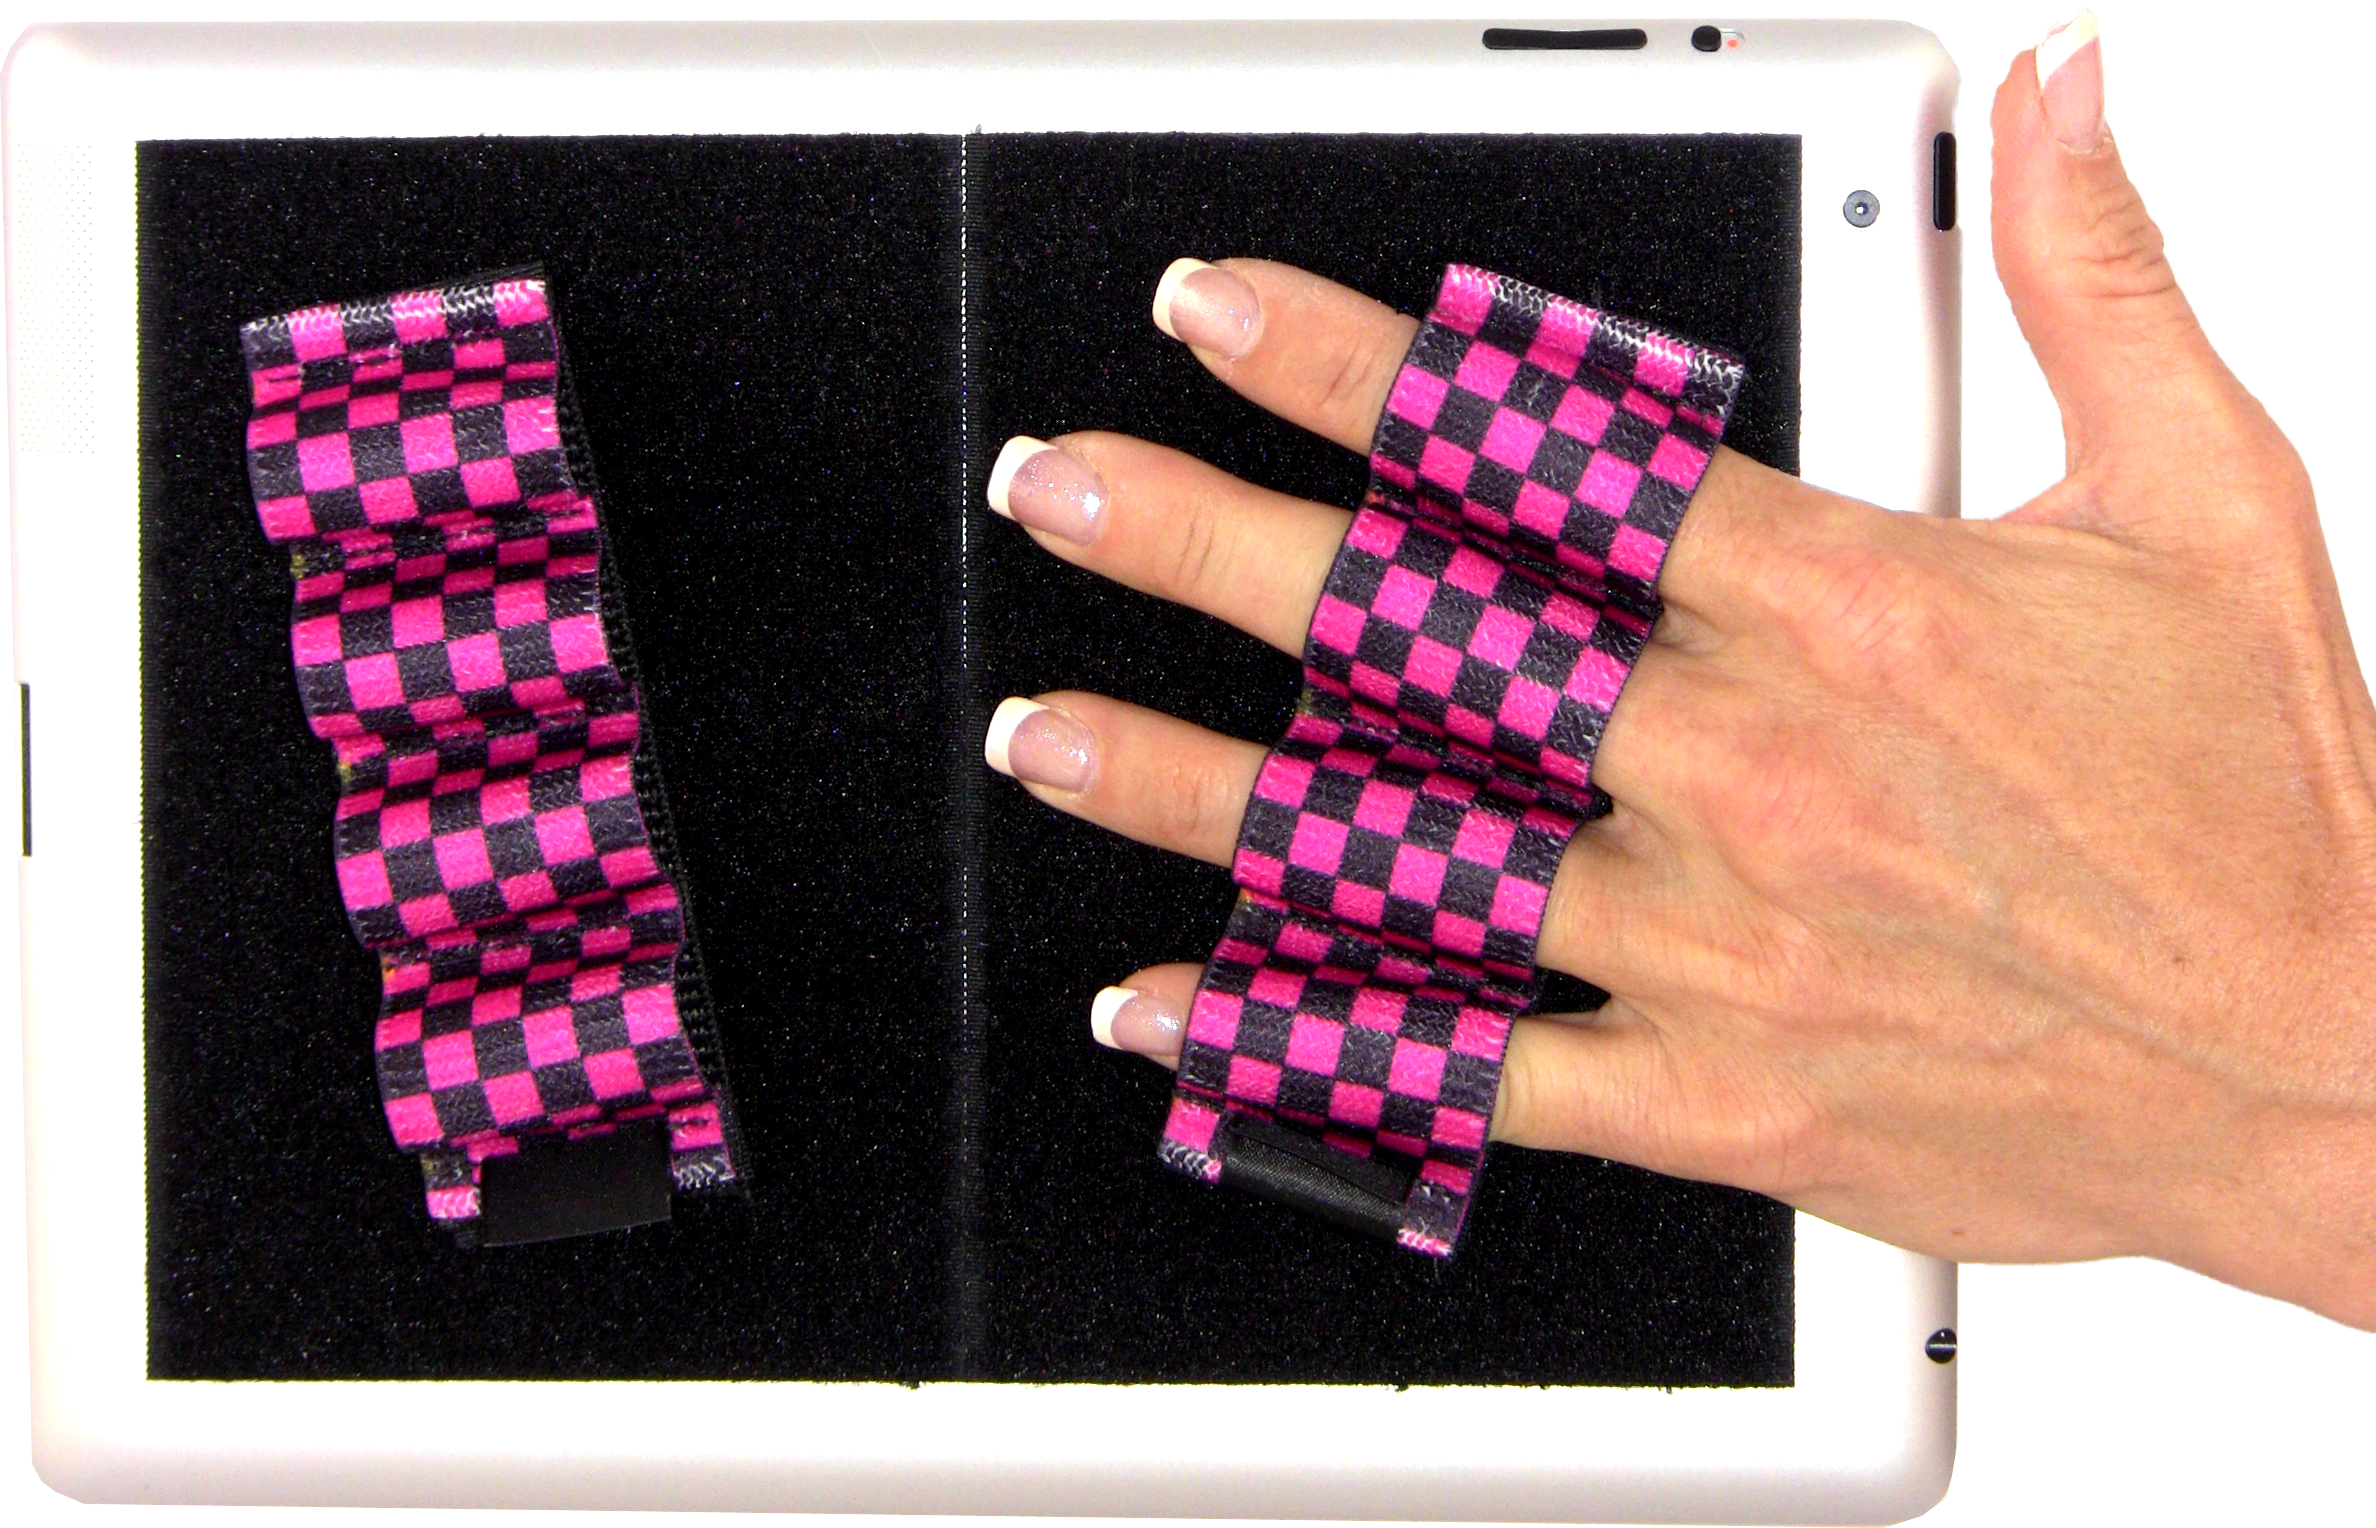 Heavy Duty 4-Loop Grips for iPad or Large Tablet (x2) - Black & Pink Checkers